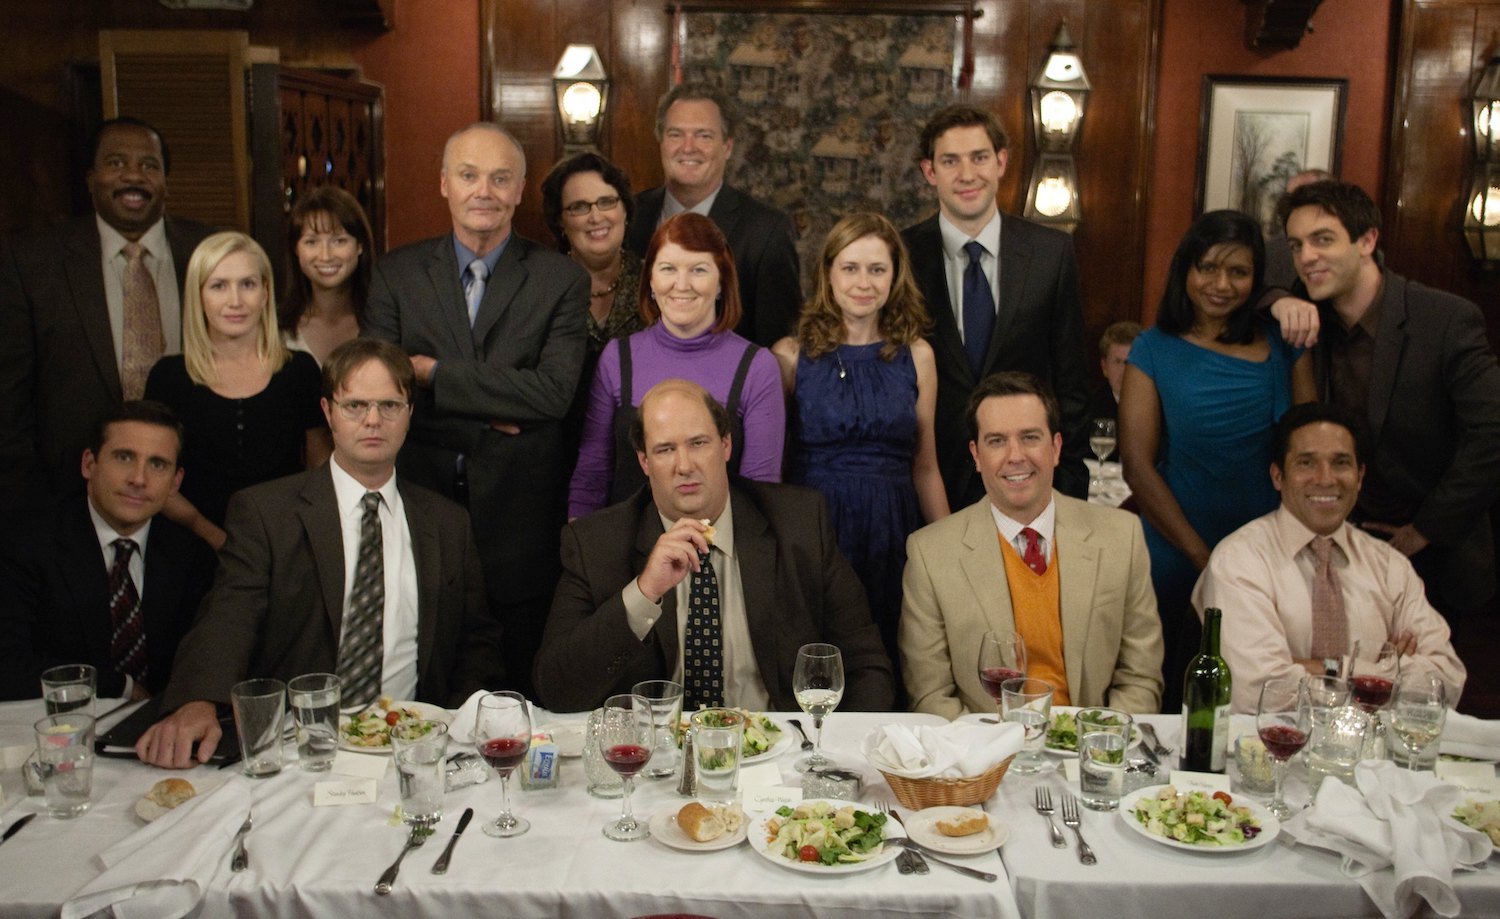 'The Office' cast pose during Jim and Pam's rehearsal dinner.